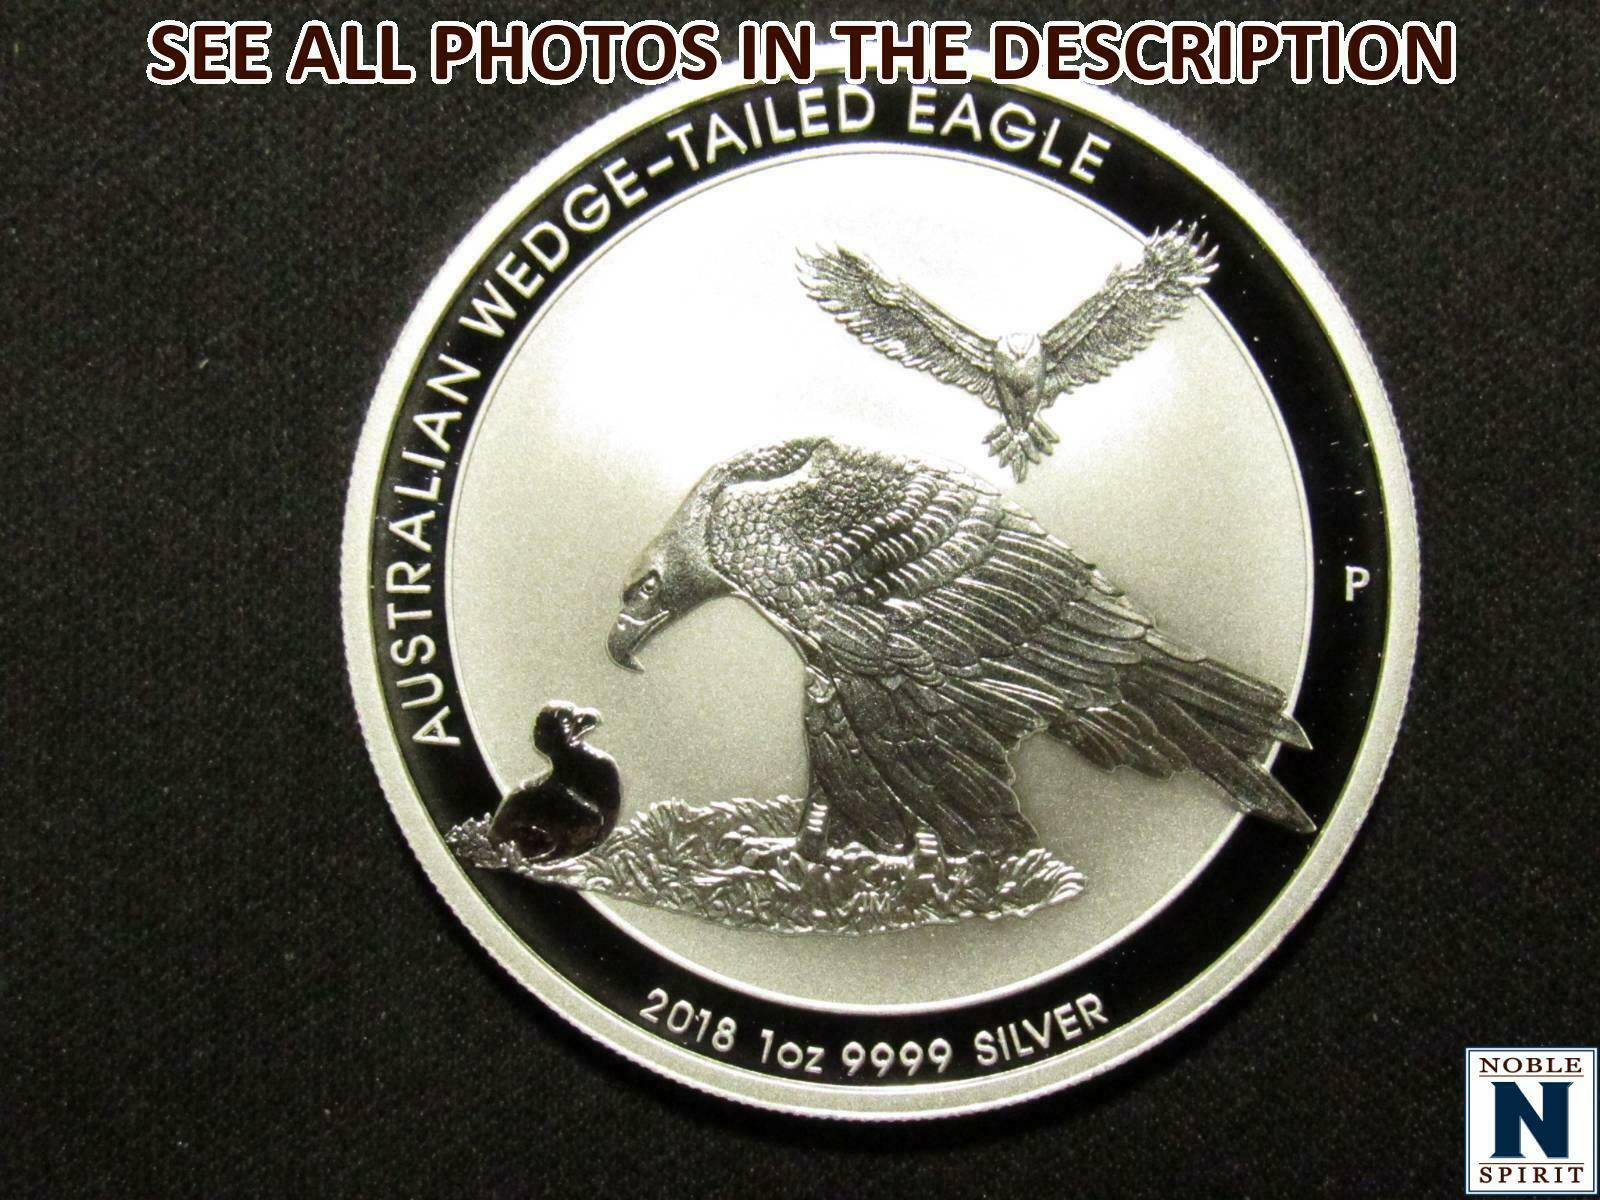 Noblespirit*(nc) 2018 Australia Wedge-tailed Eagle 1oz Silver Reverse Proof Coin